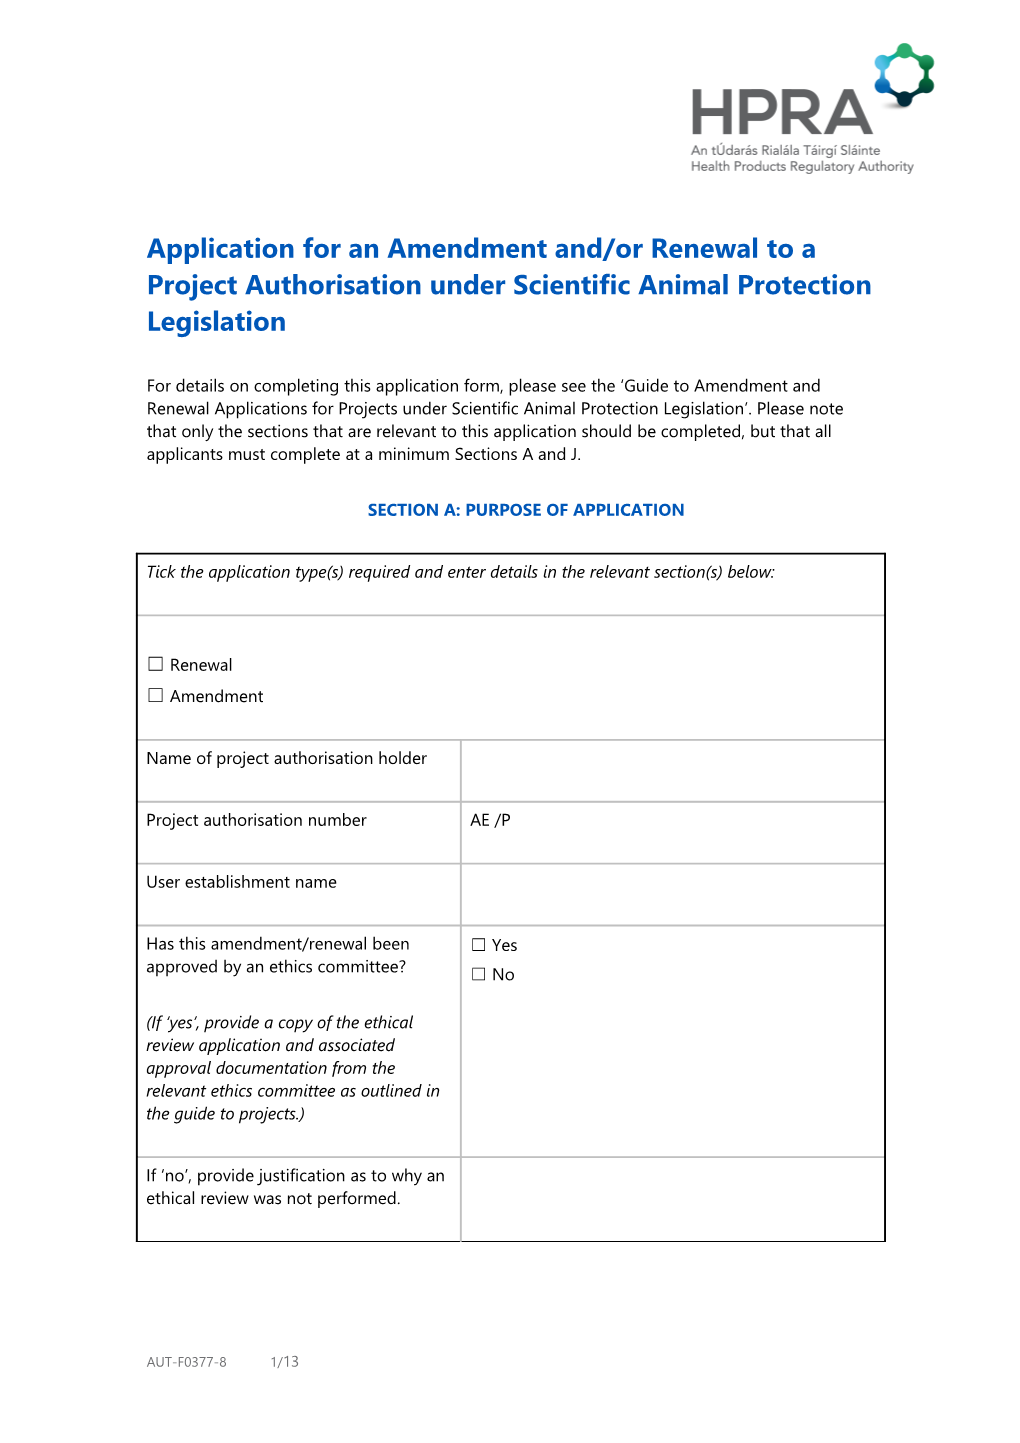 Application for an Amendment And/Or Renewal to a Project Authorisation Under Scientific